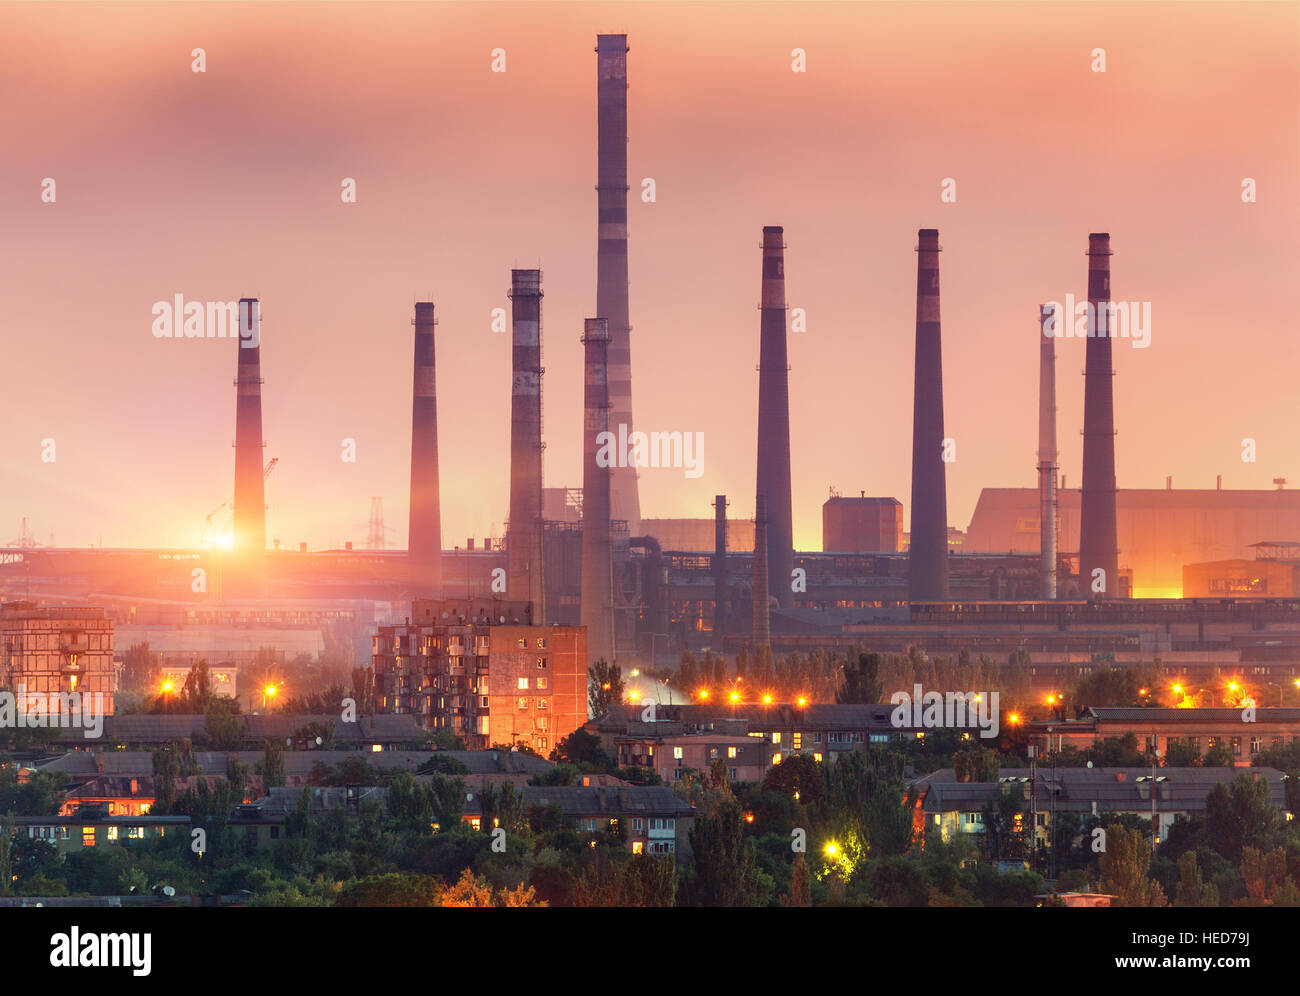 City buildings on the background of steel factory with smokestacks at sunset. Metallurgical plant with chimney. Heavy industry Stock Photo